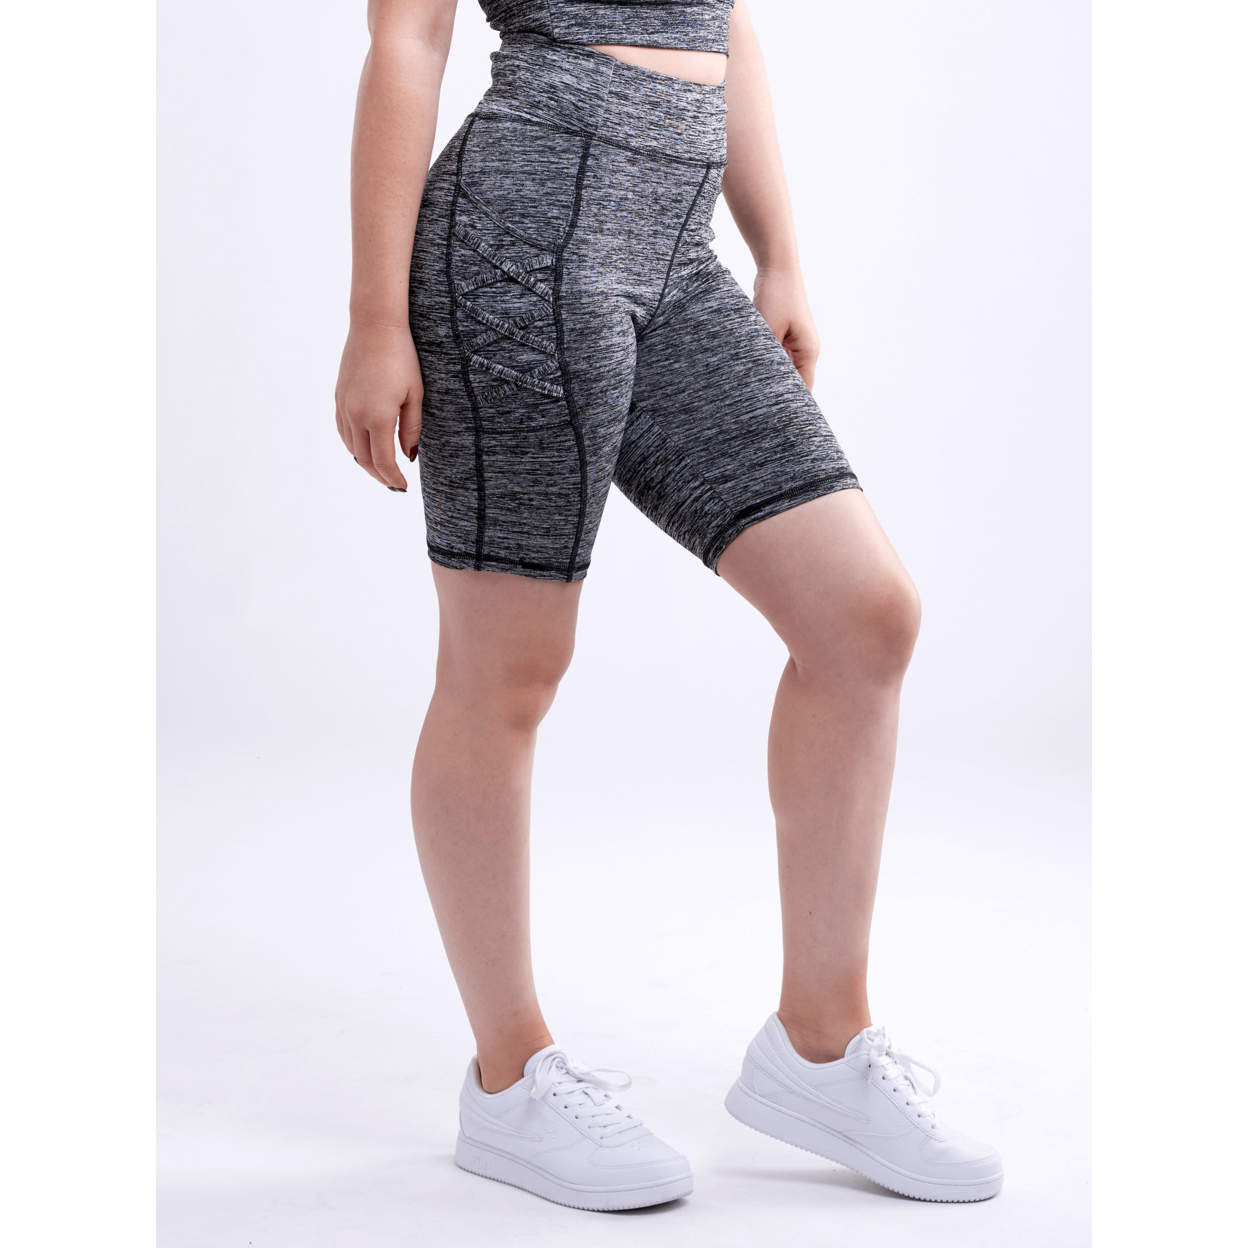 High-Waisted Workout Shorts With Pockets & Criss Cross Design - Grey, Large / Extra-Large